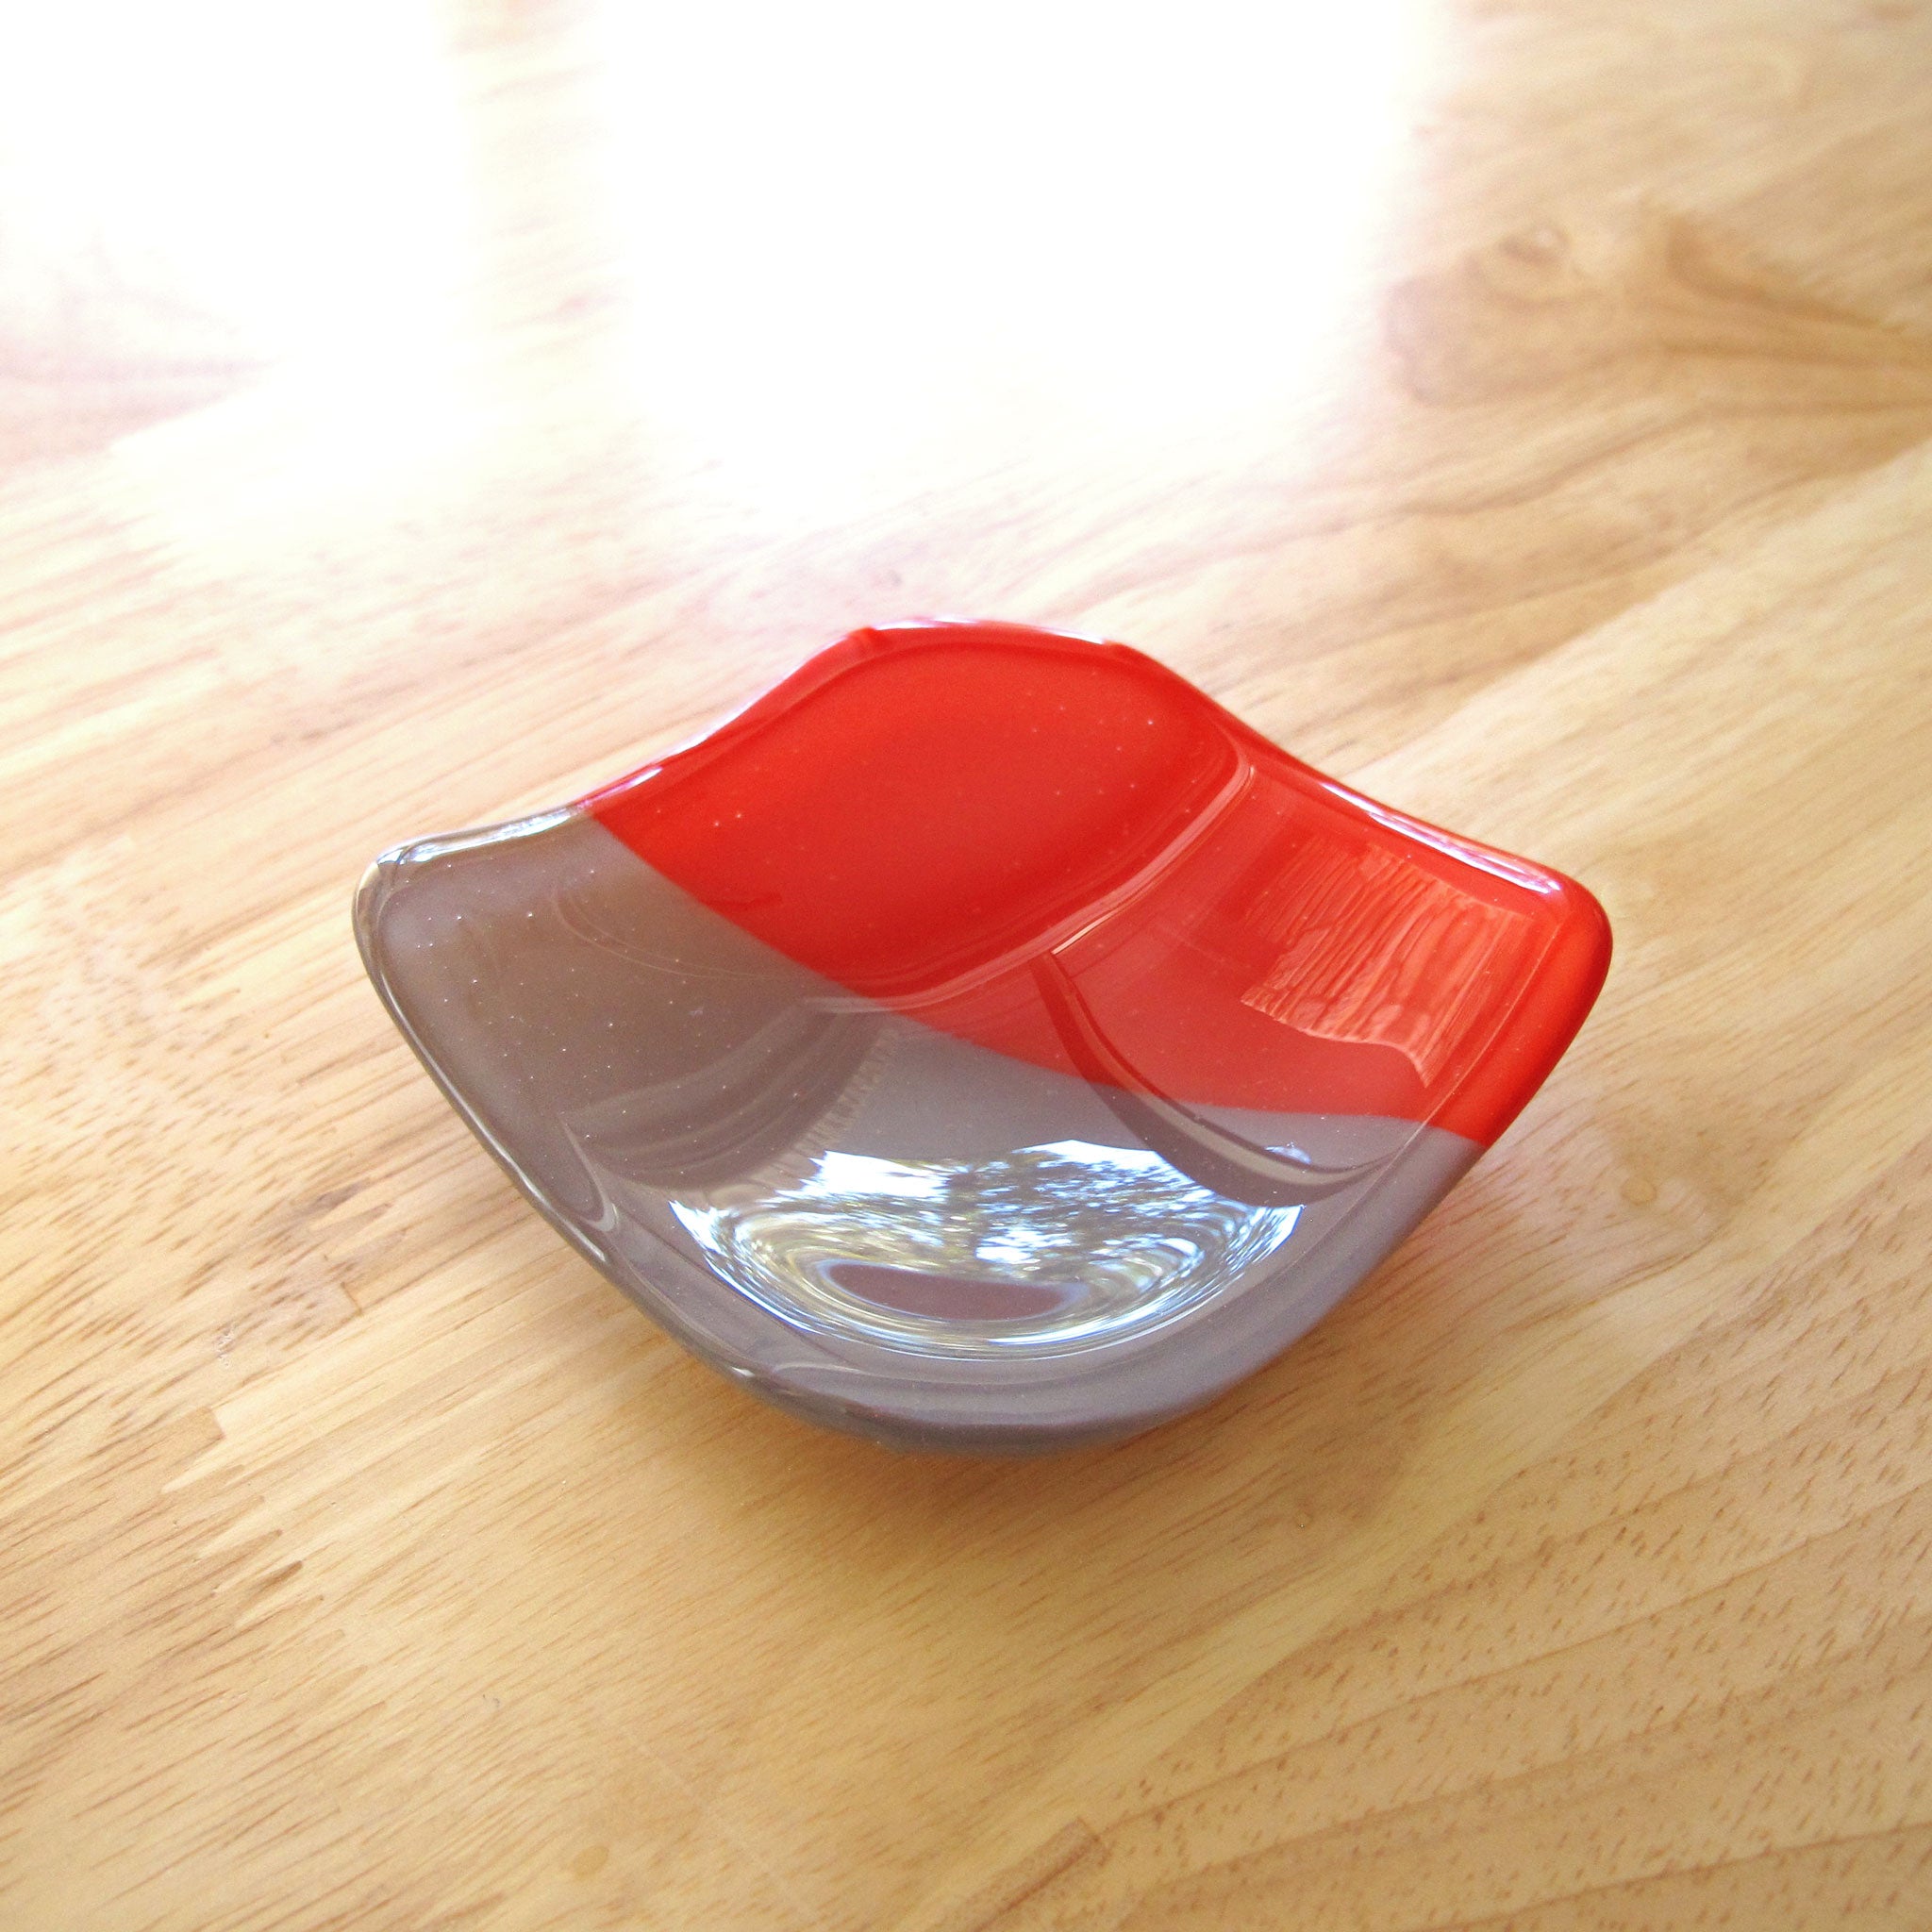 Katie Kismet red and gray catchall dish for rings, candles, cone incense (top view)